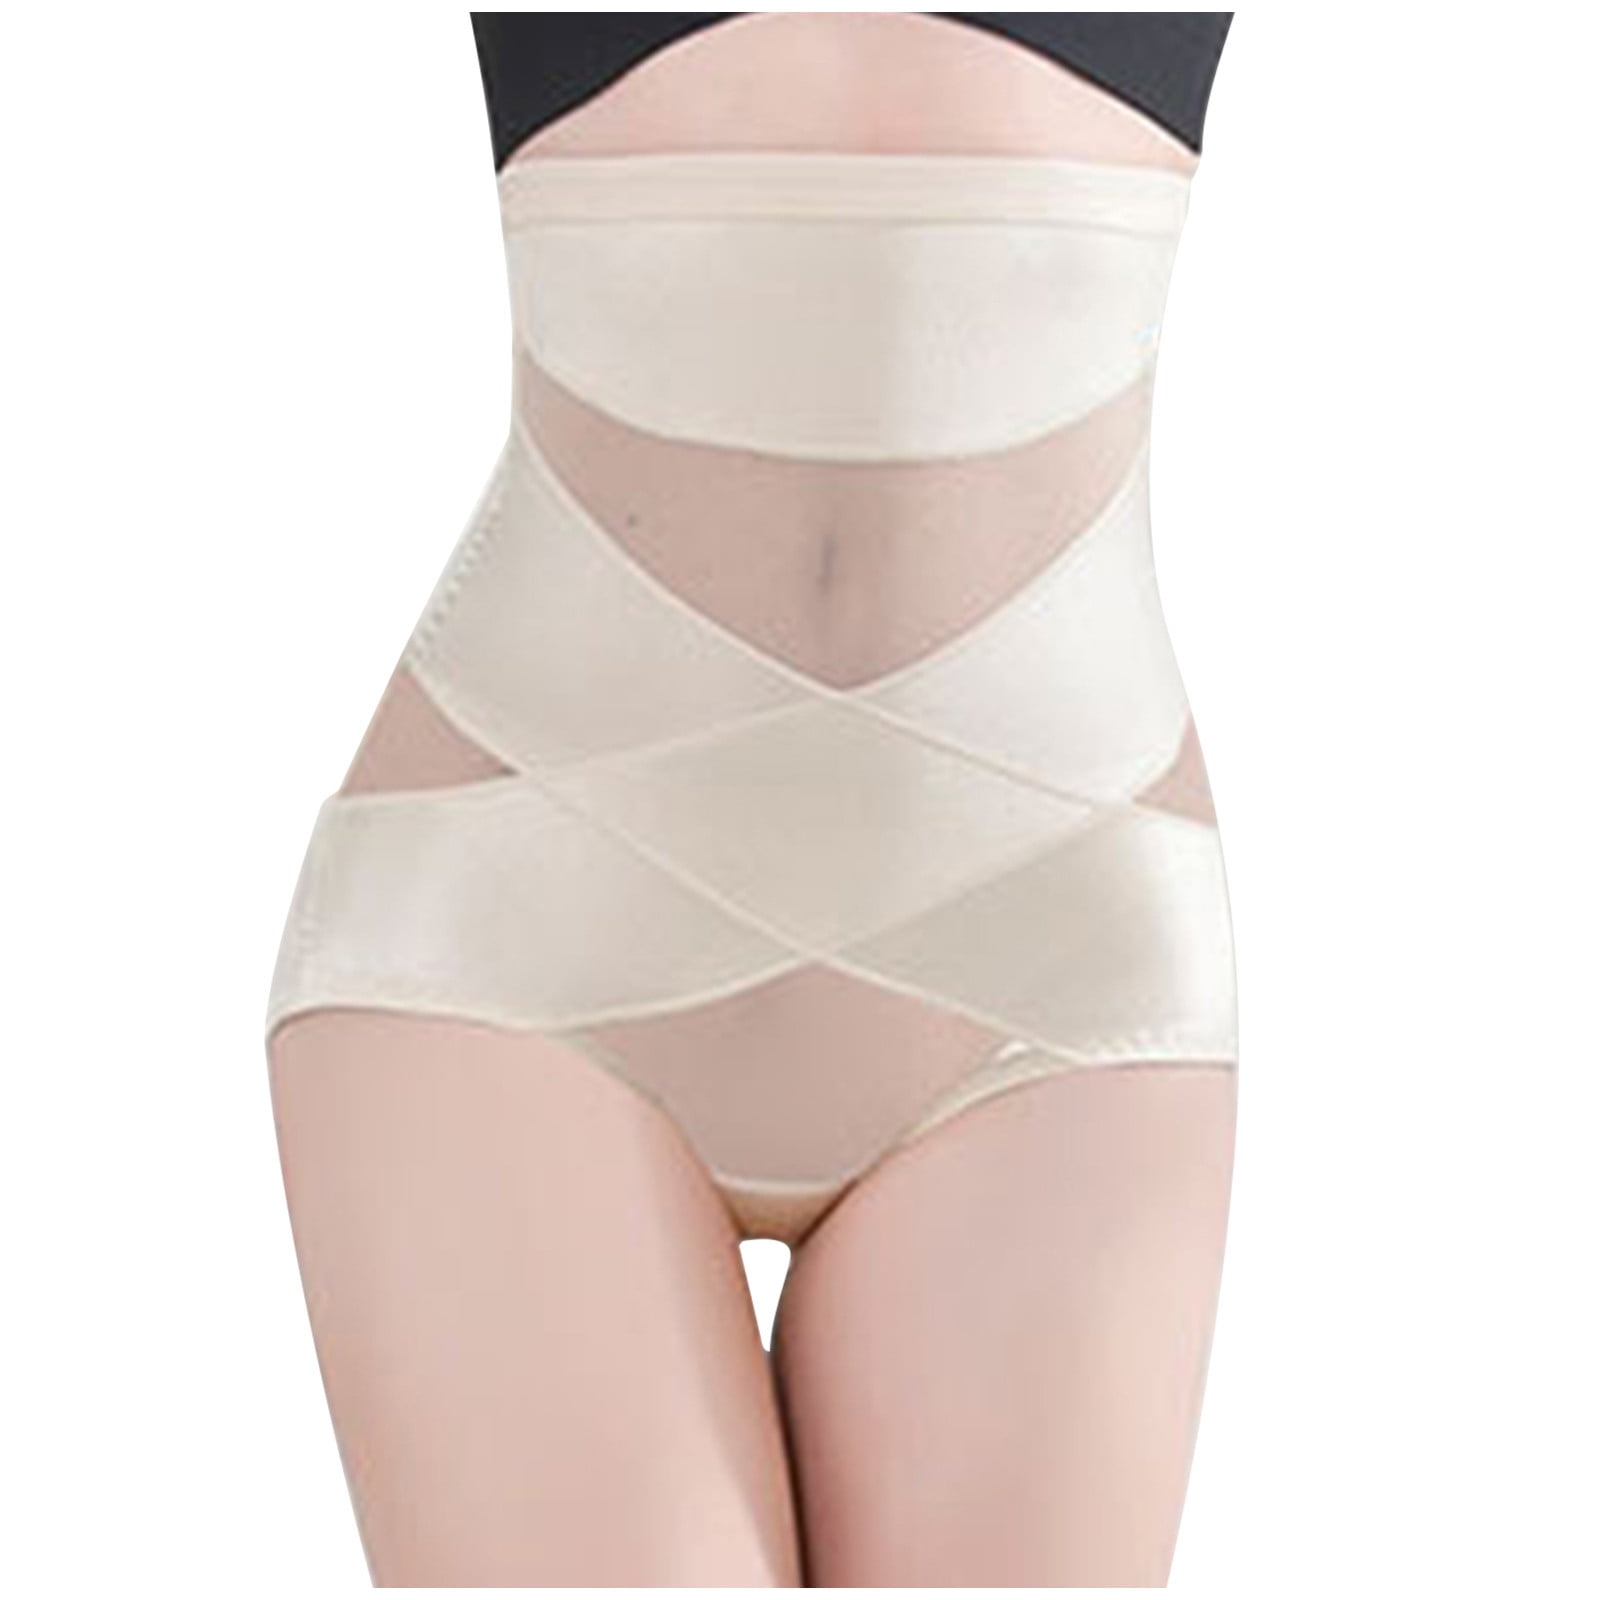 Cathalem Smooth Corset tucking shaping waist and pants Women's high waist  Shapeware Body Spanks for Women Underwear Beige Large 